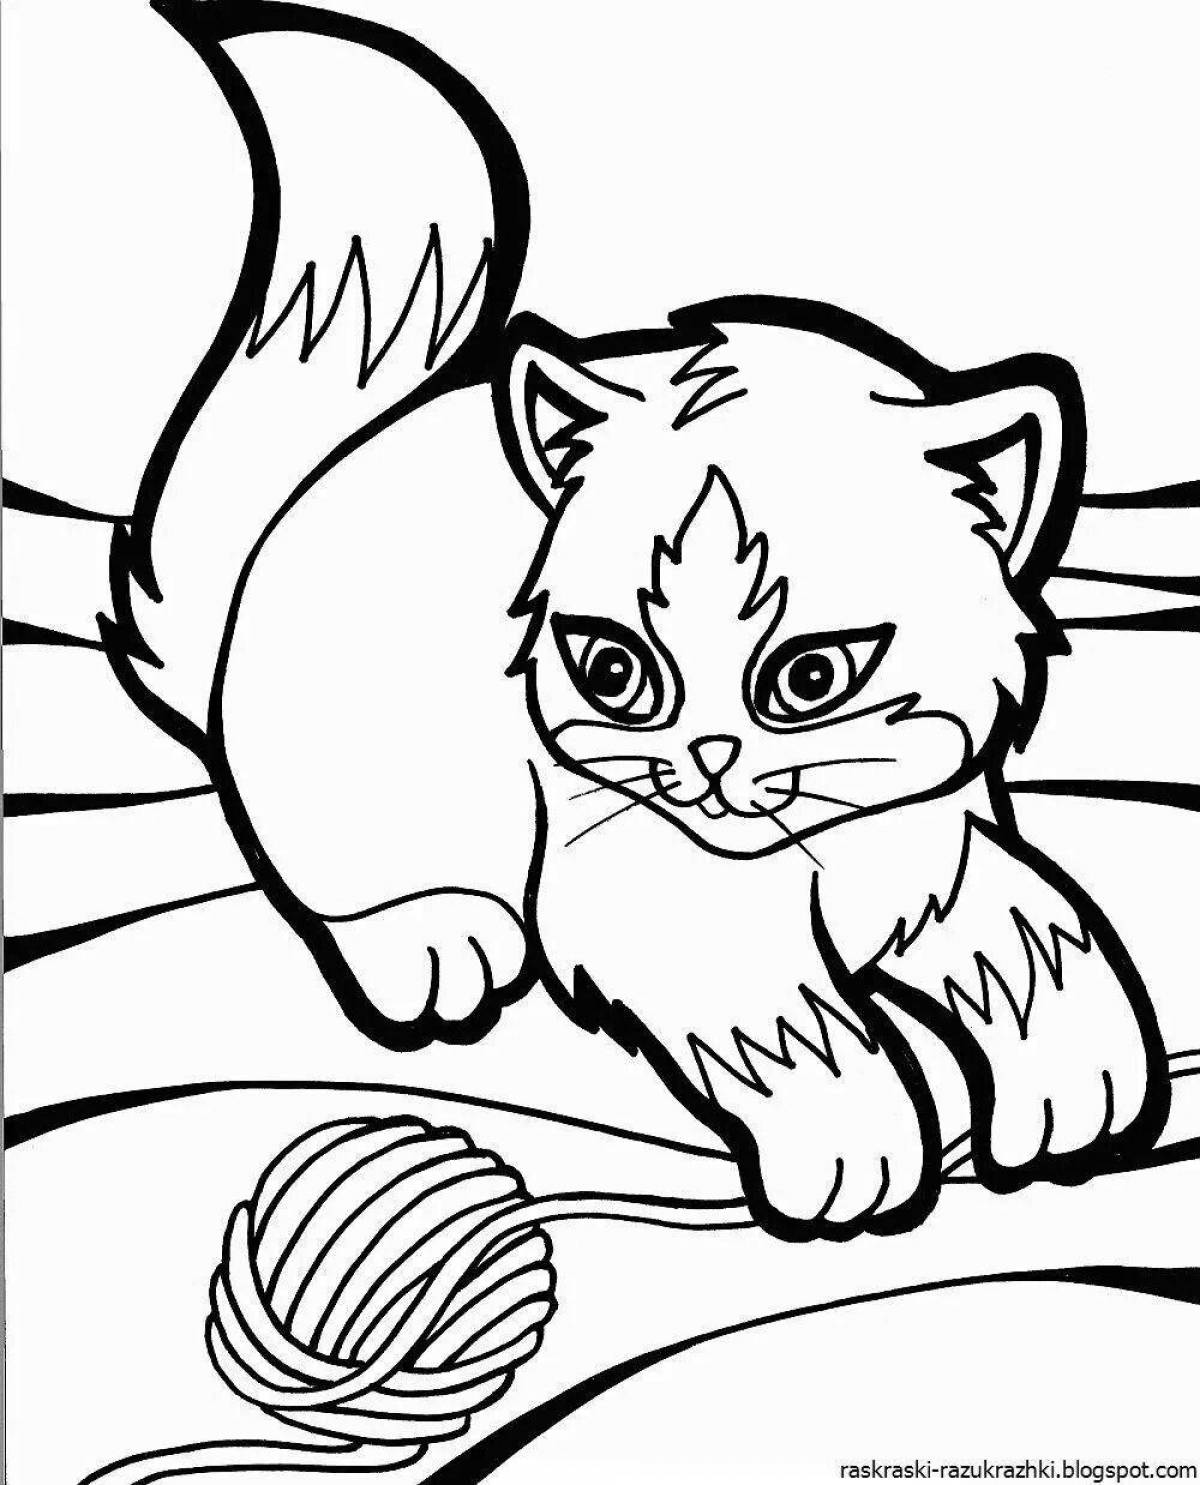 Coloring page funny mrr meow